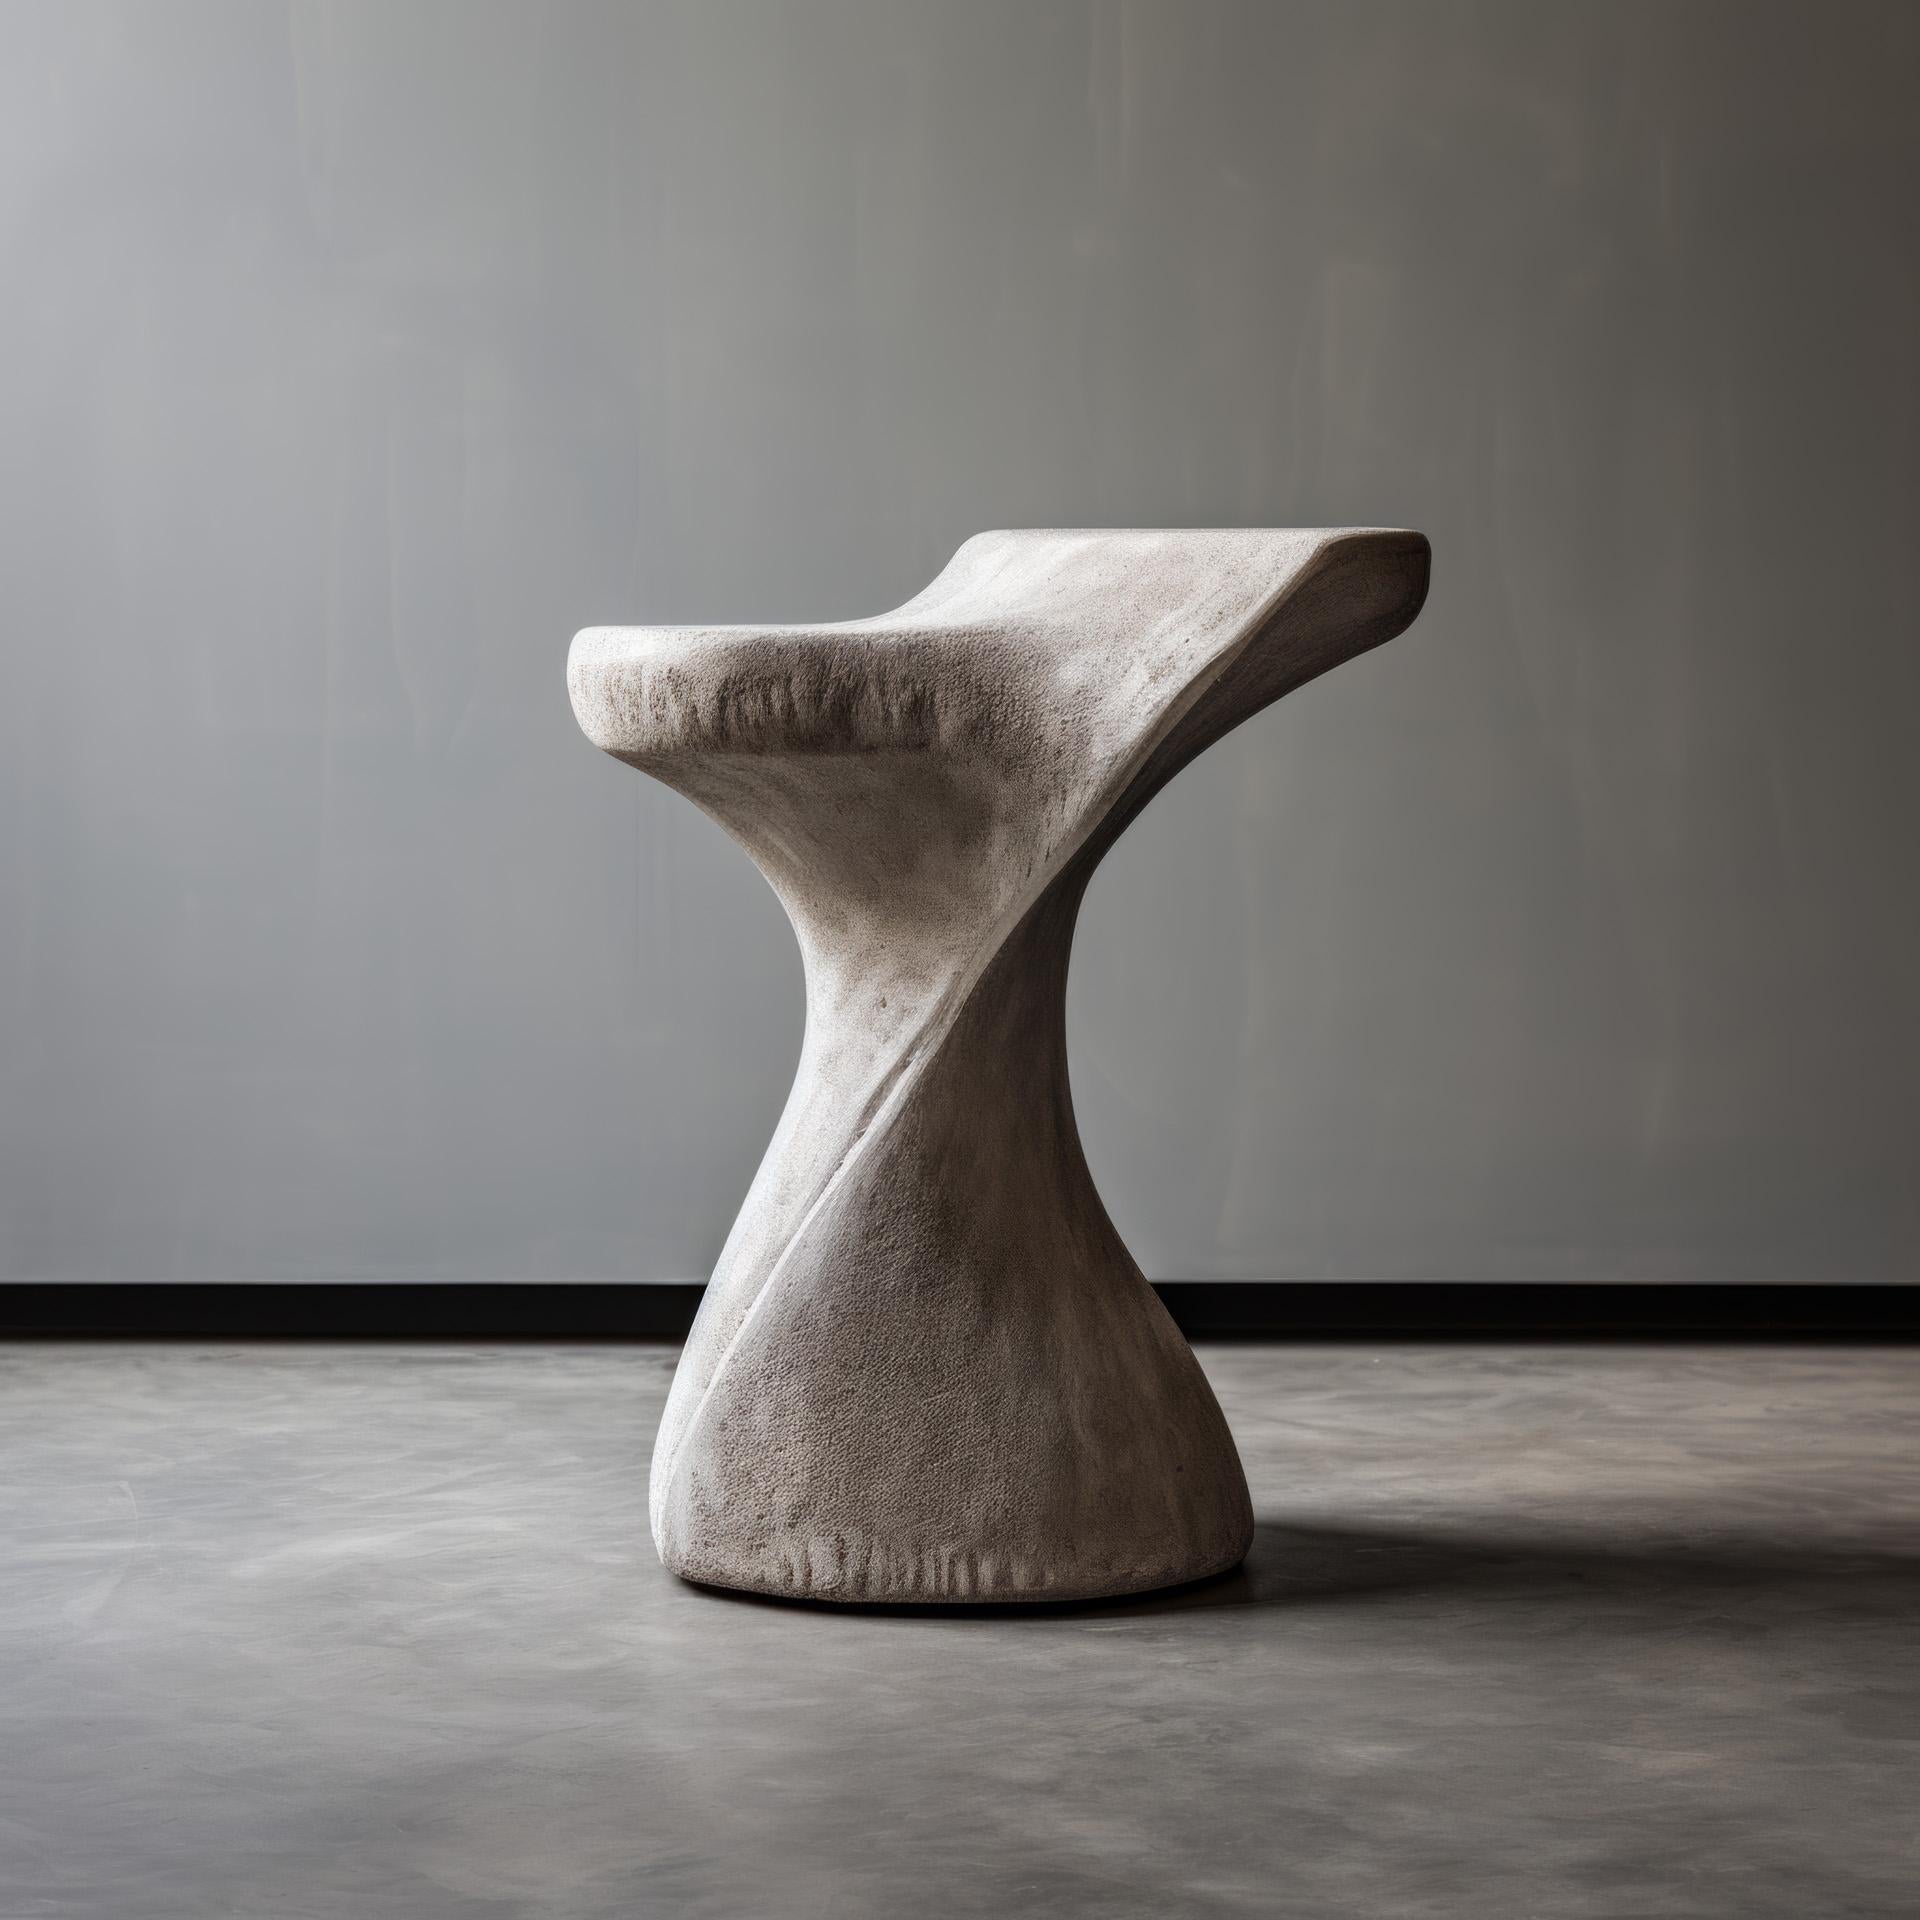 Shitake Side Table by objective OBJECT Studio
Dimensions: D 34.5 x W 38 x H 61 cm 
Materials: Concrete.


objective OBJECT
an embodiment of our architectural ethos.

We represent an unwavering dedication to truth, impartiality, and the profound